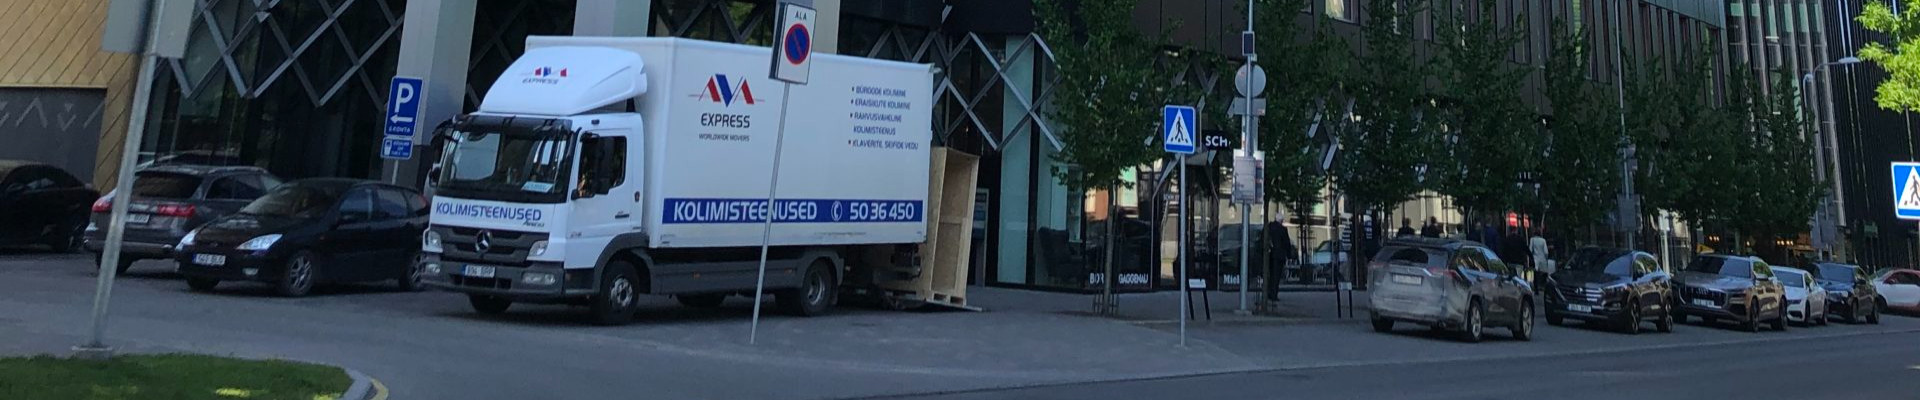 transport and courier services, parcel works services, Moving, Private Moving Service, international moving service, Moving Services for Businesses, Piano transport, Moving safes and heavy goods, Special transport operations, moving services in tartu